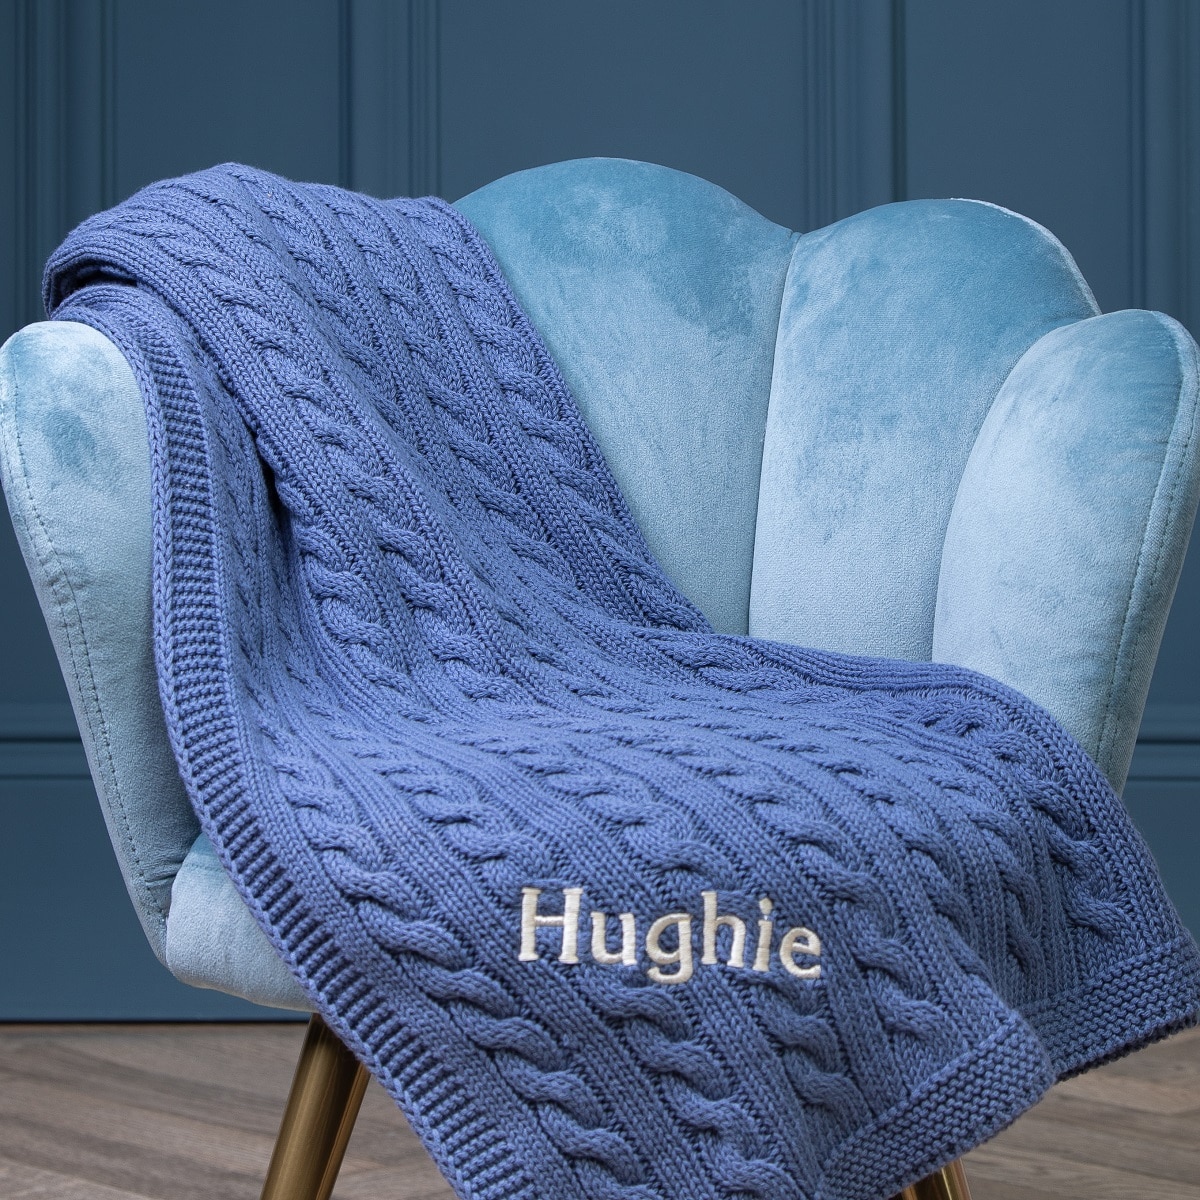 Toffee Moon personalised storm blue luxury cable baby blanket